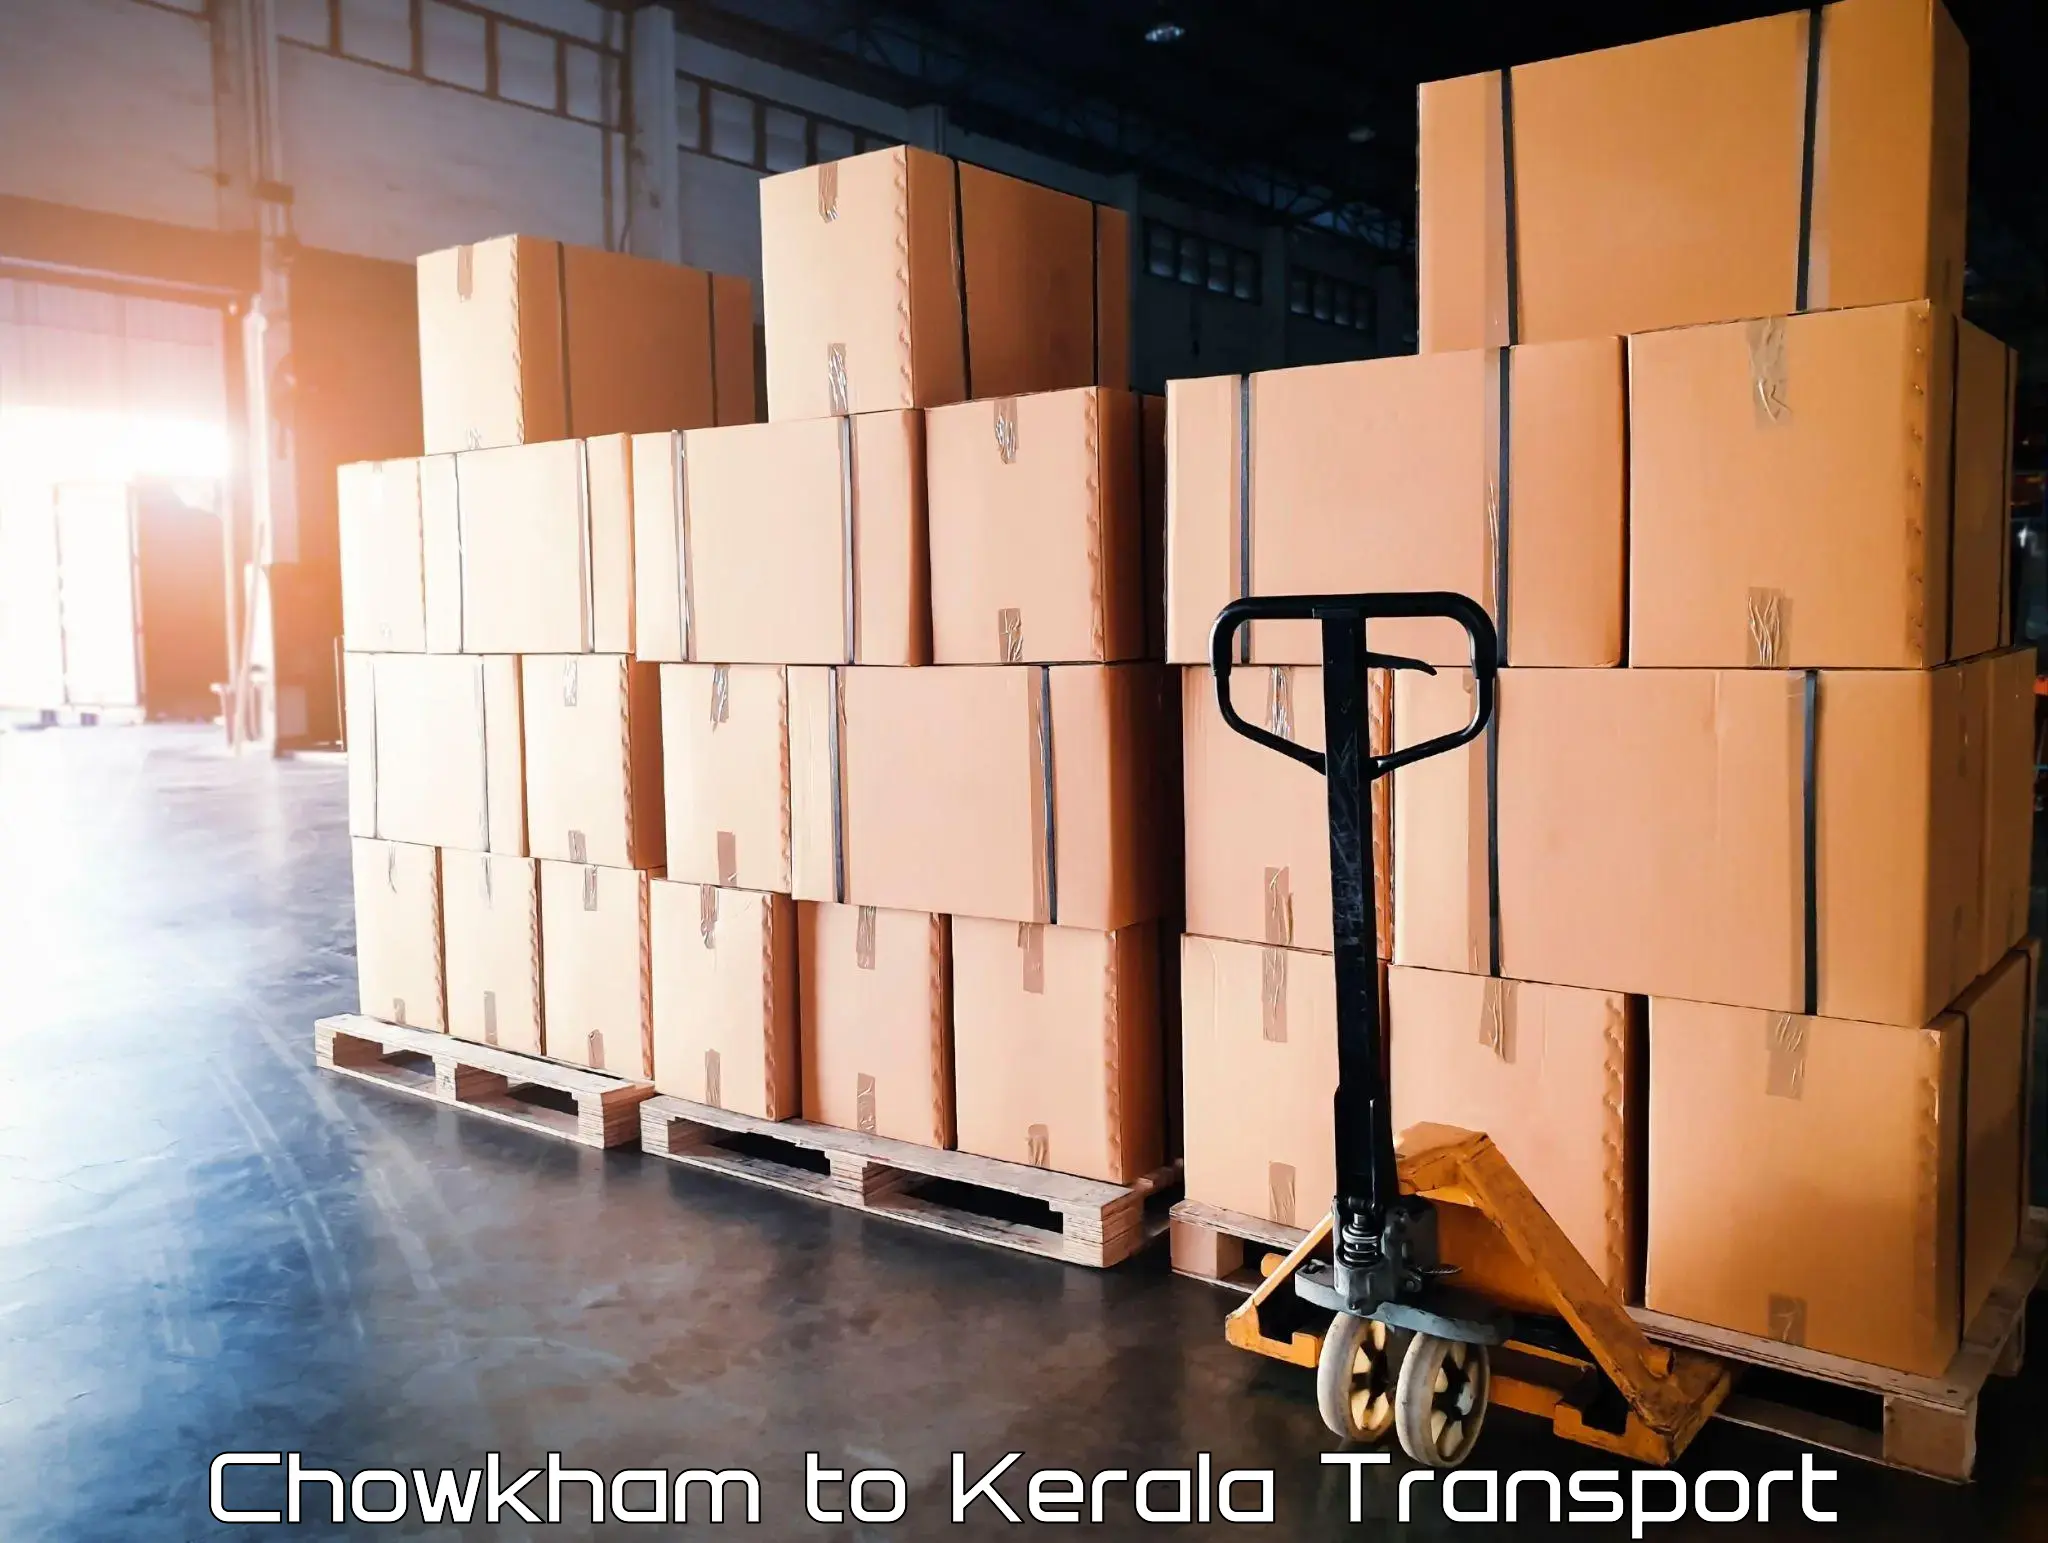 Sending bike to another city Chowkham to Kasaragod